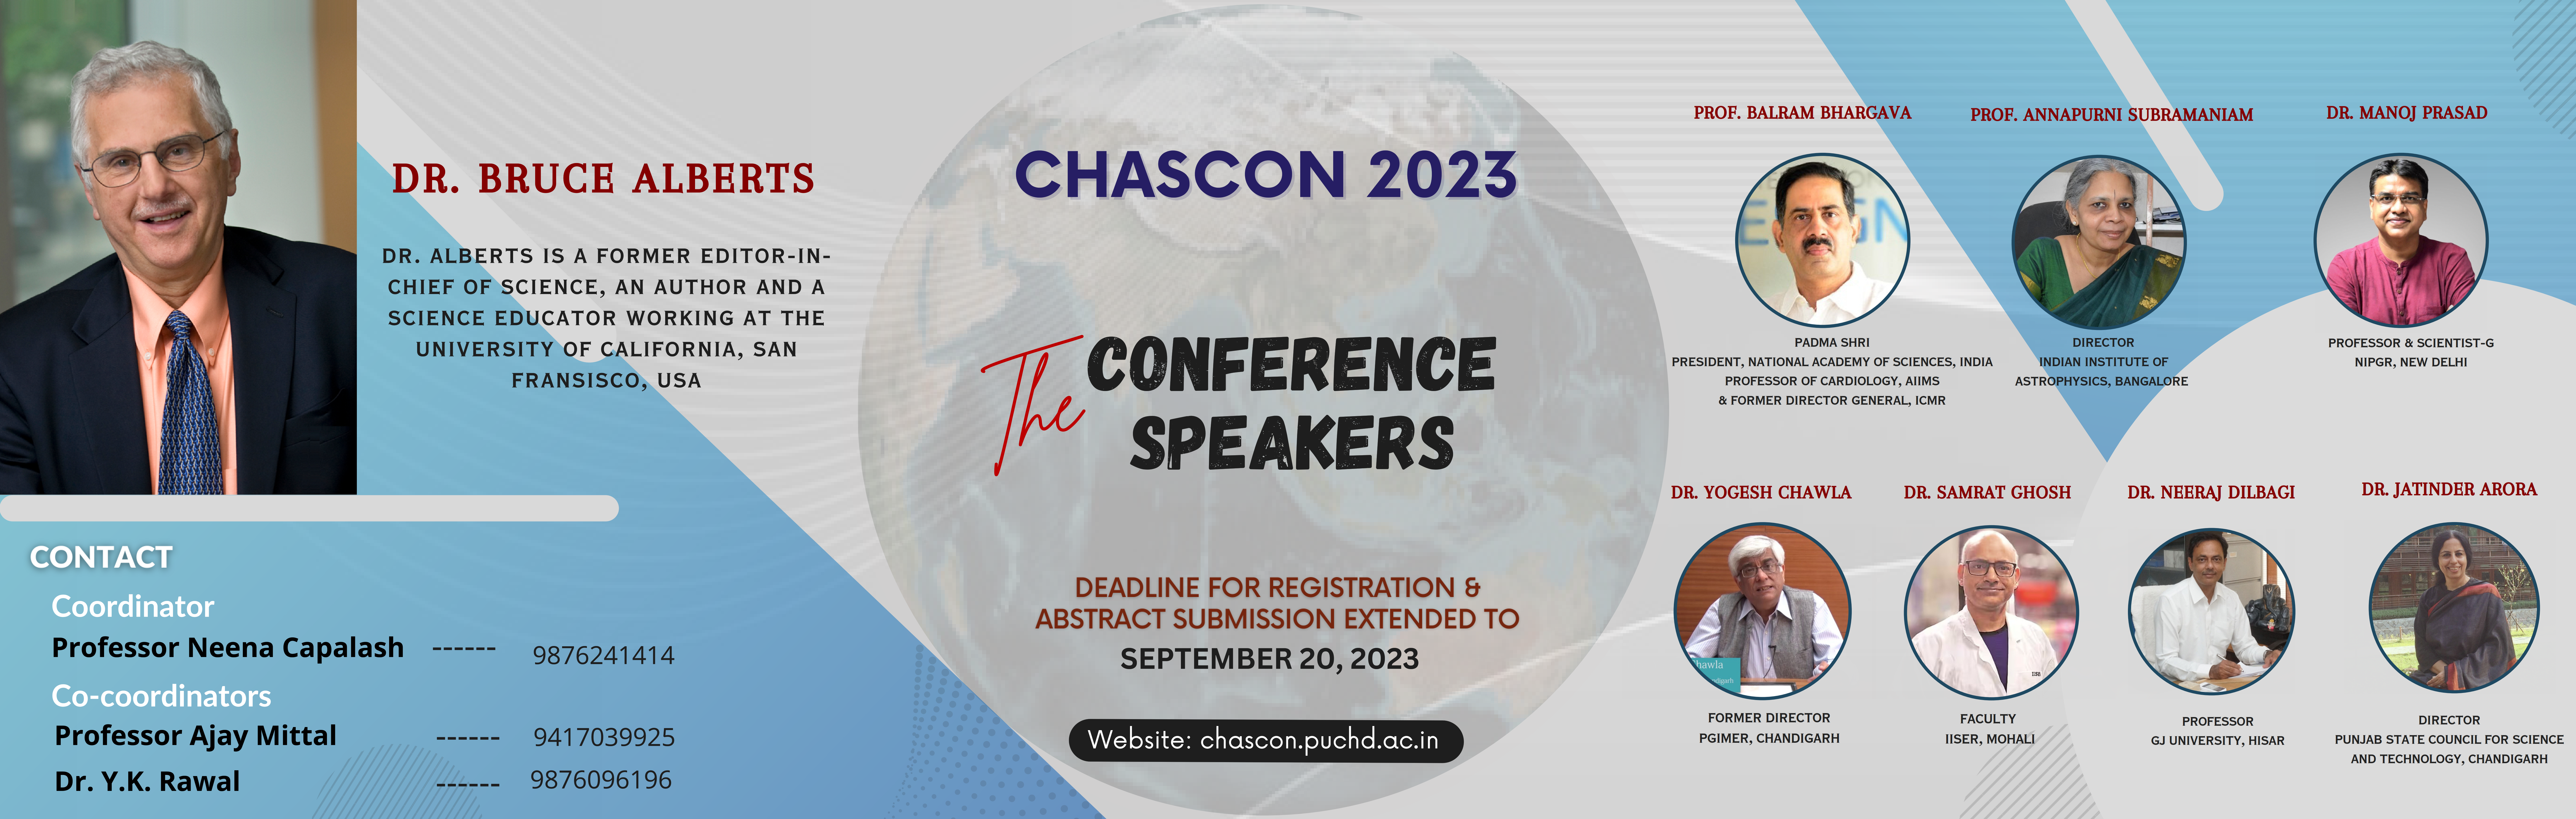 16th CHASCON 2023 - Conference Speakers